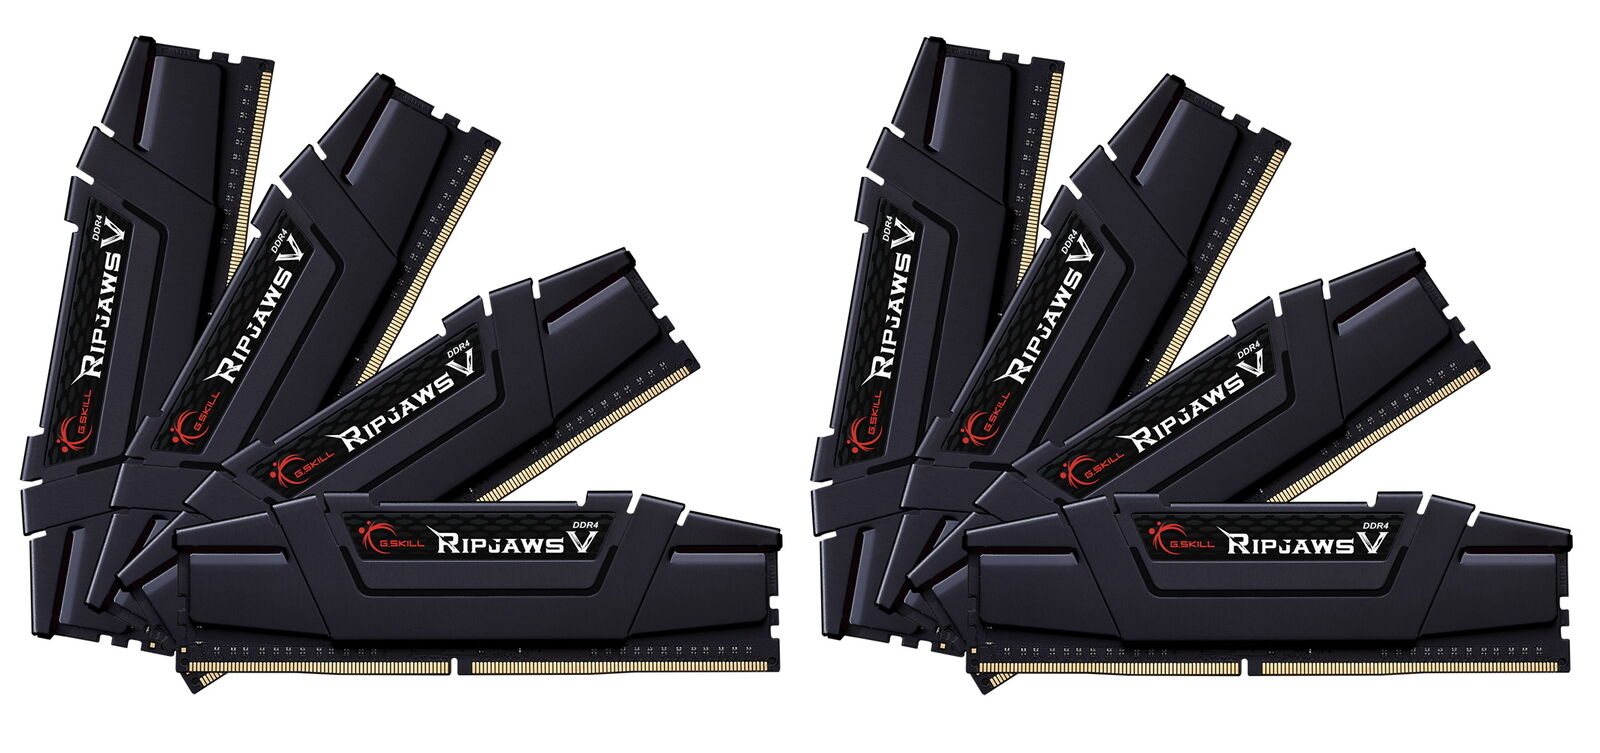 Need Faster RAM Upgrades. : Boost PC Speed With These Top DDR4 RAM Options